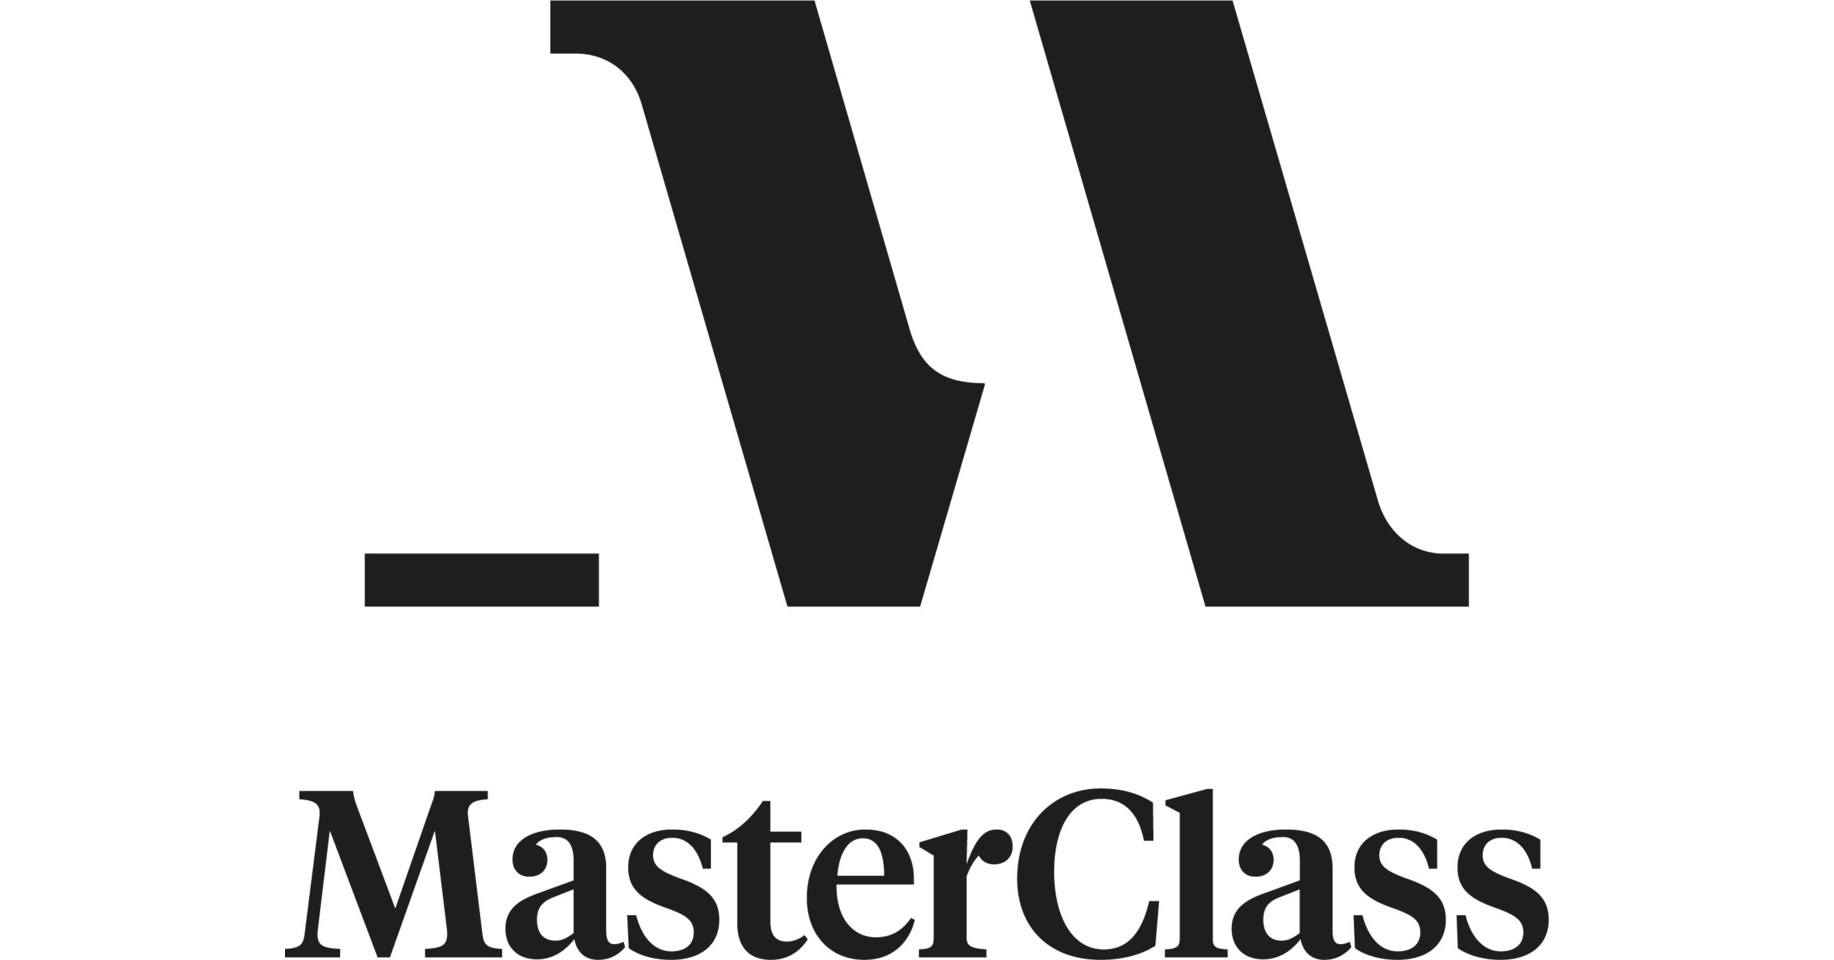 MasterClass Introduces More Classes on Personal Growth and Development and  Expands Flexible Formats